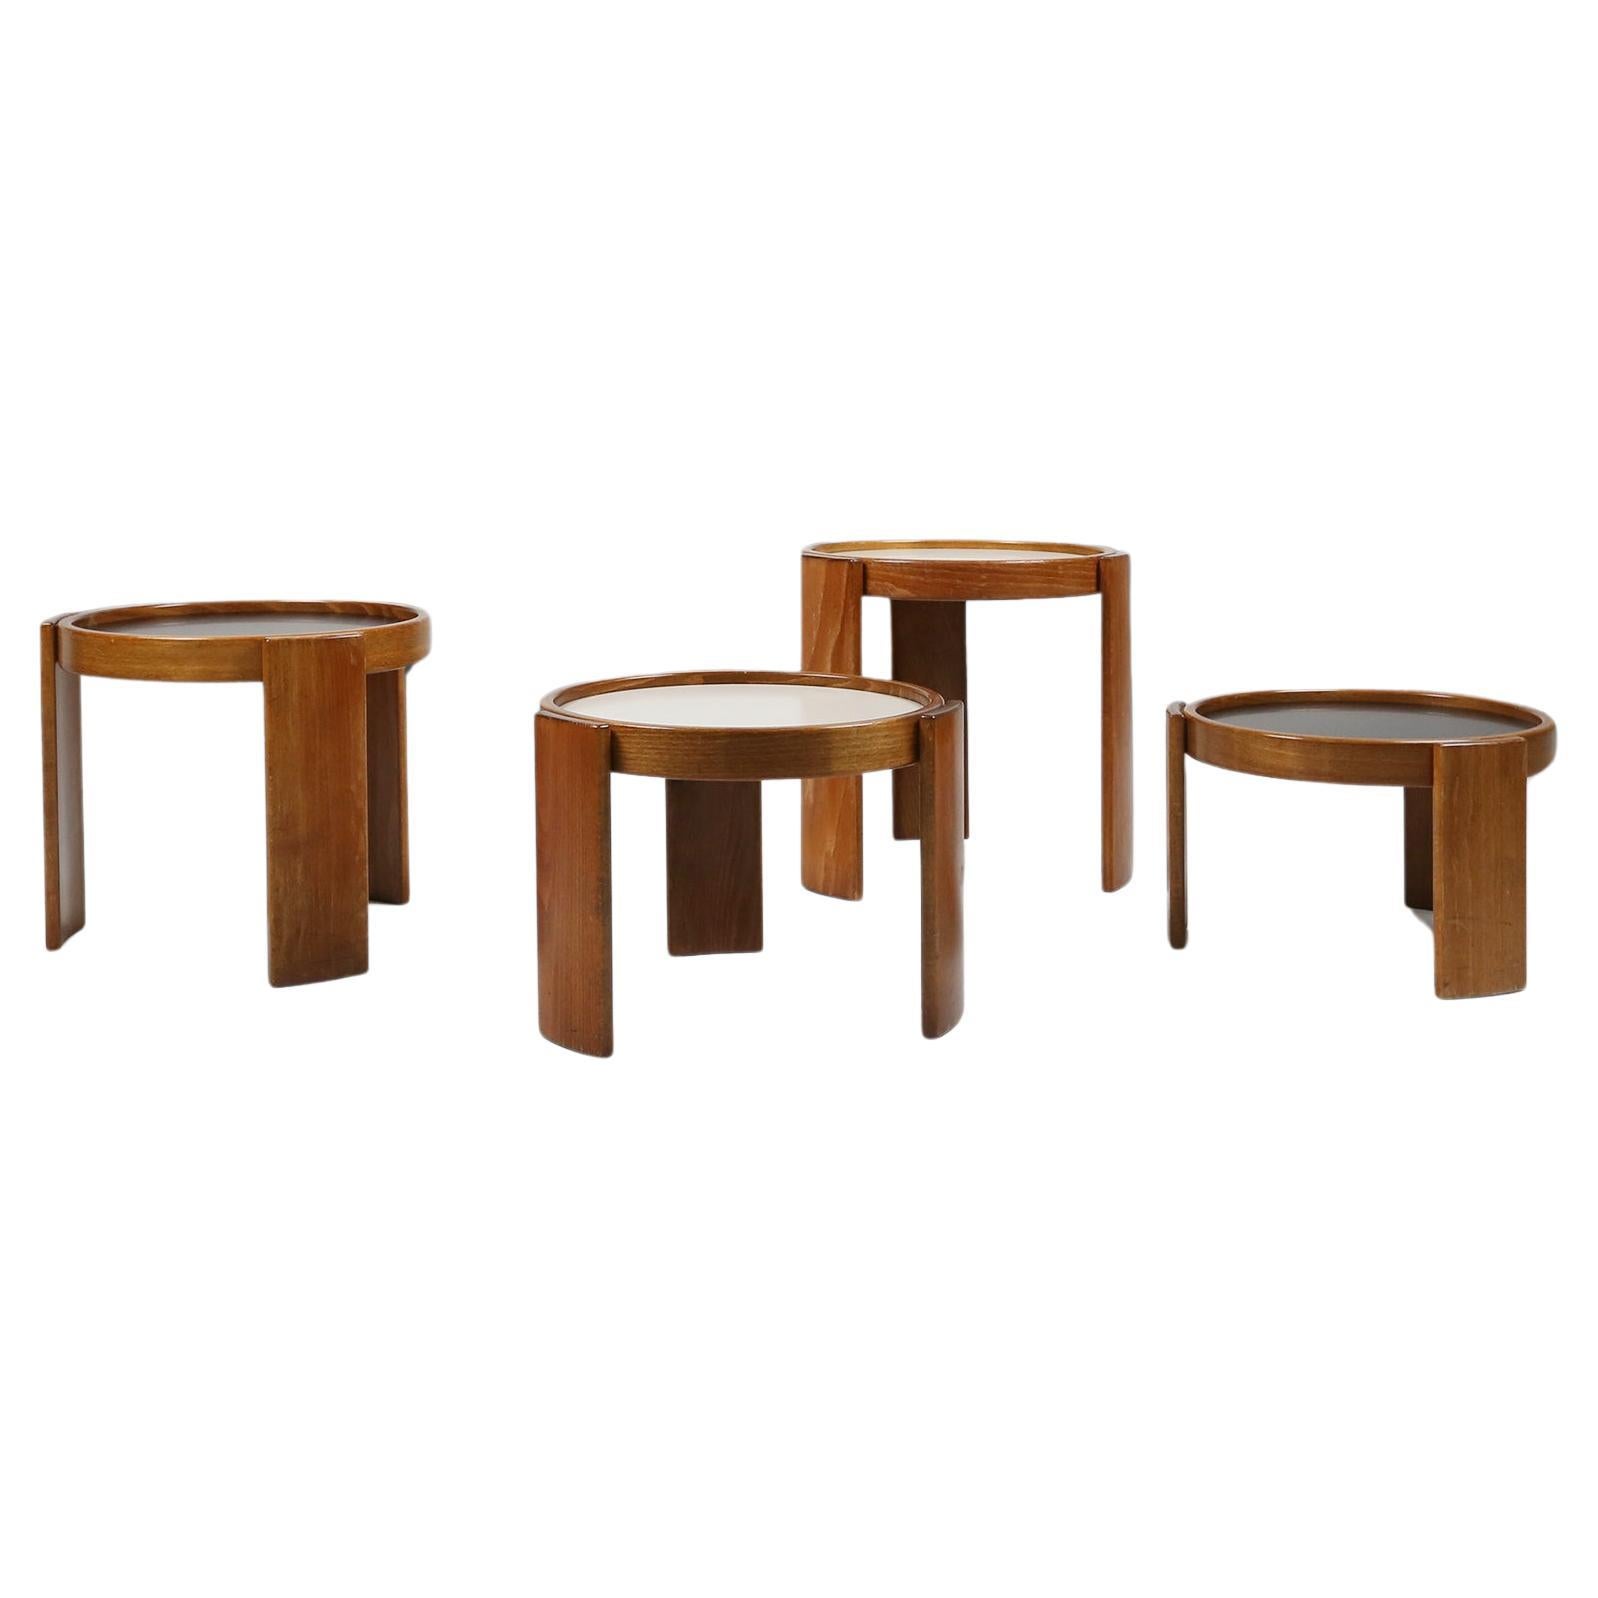 Gianfranco Frattini for Casina, Italy, 1966, early edition wooden nesting tables For Sale